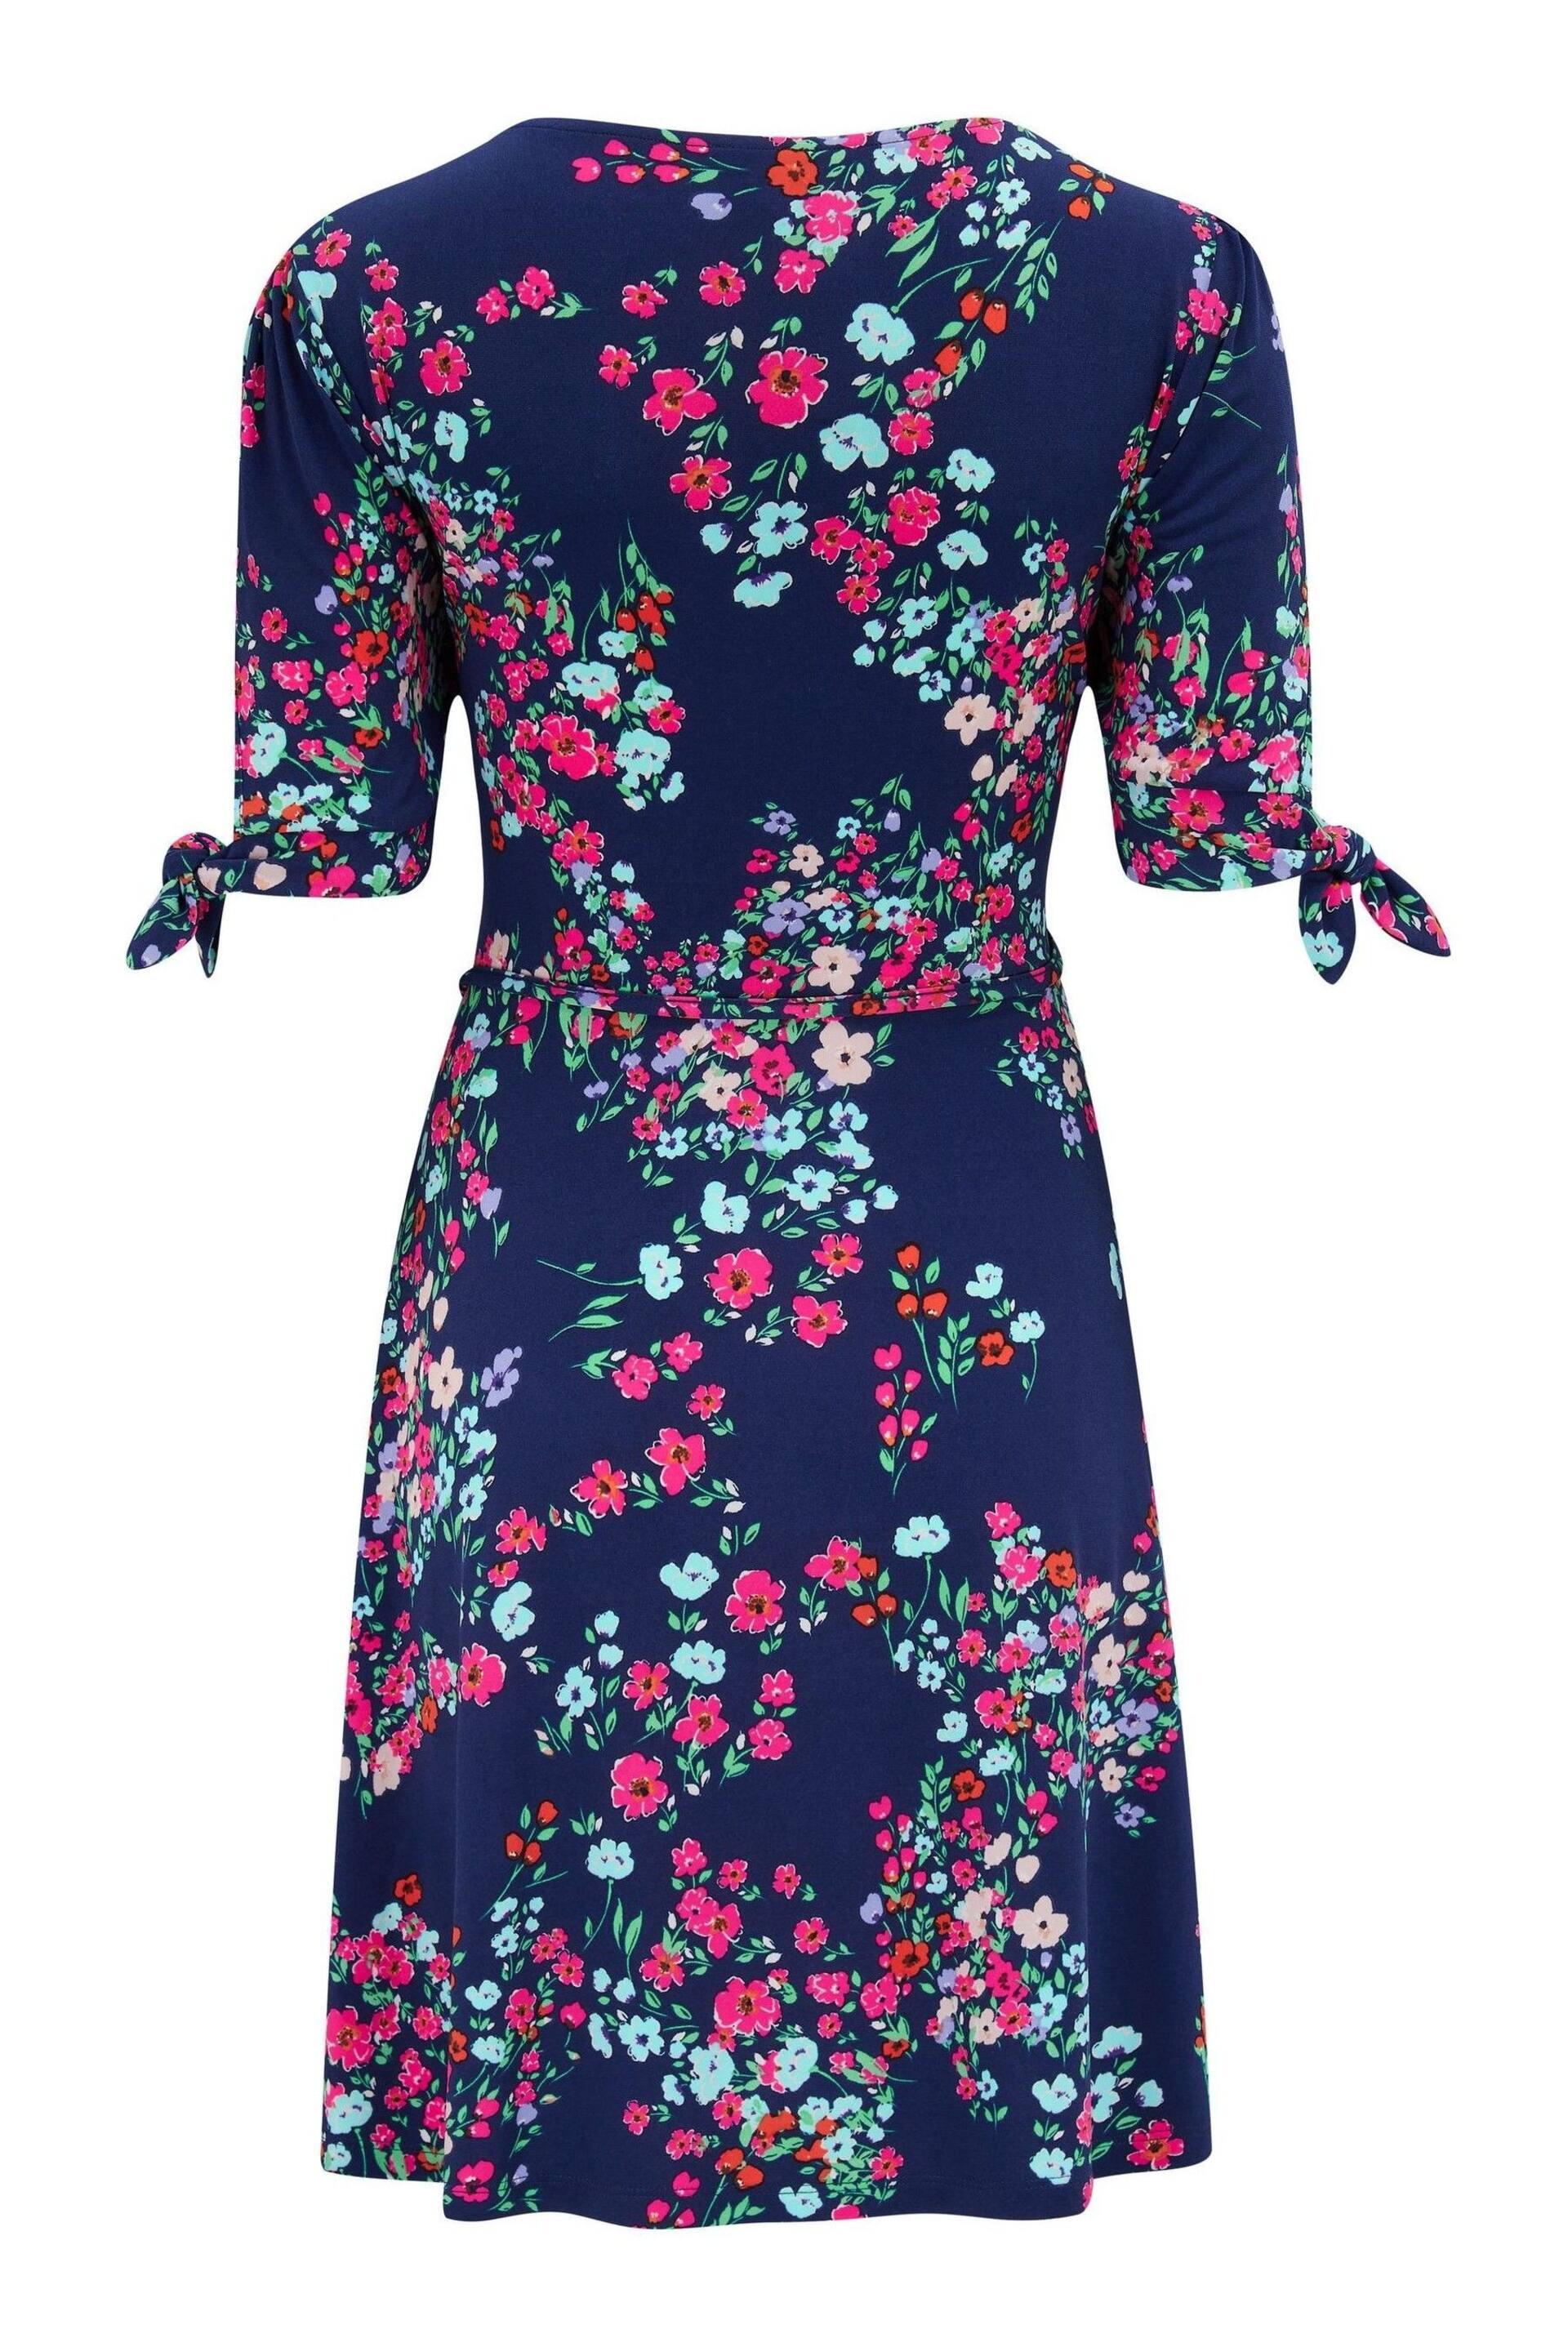 Pour Moi Navy Blue Floral Bella Fuller Bust Slinky Stretch Tie Sleeve Mini Dress - Image 4 of 4